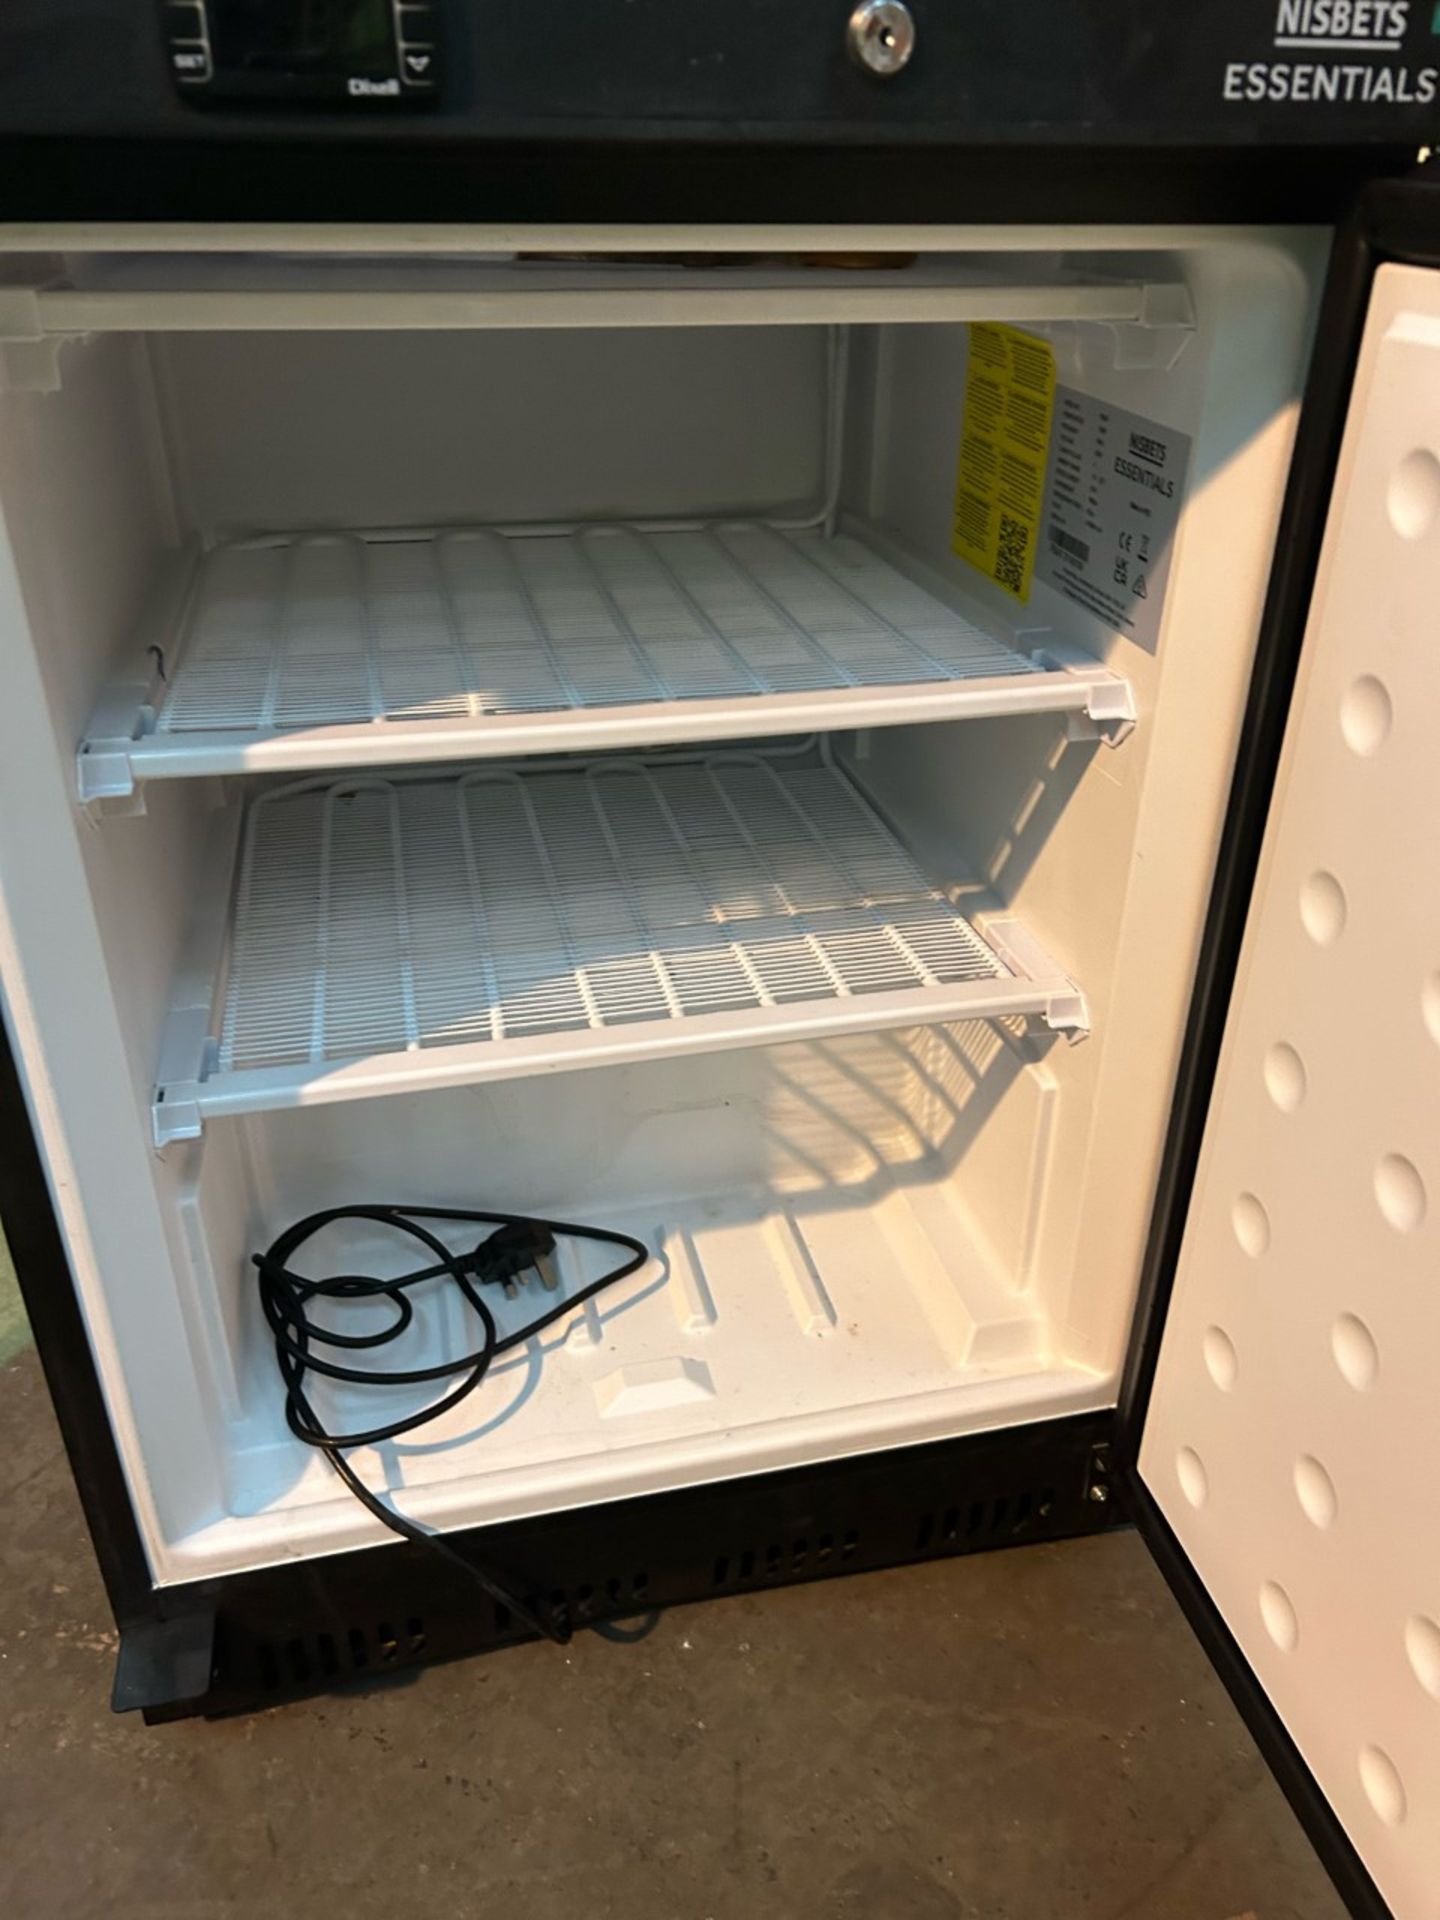 Nisbets essentials undercounted freezer. Good condition. - Image 3 of 3